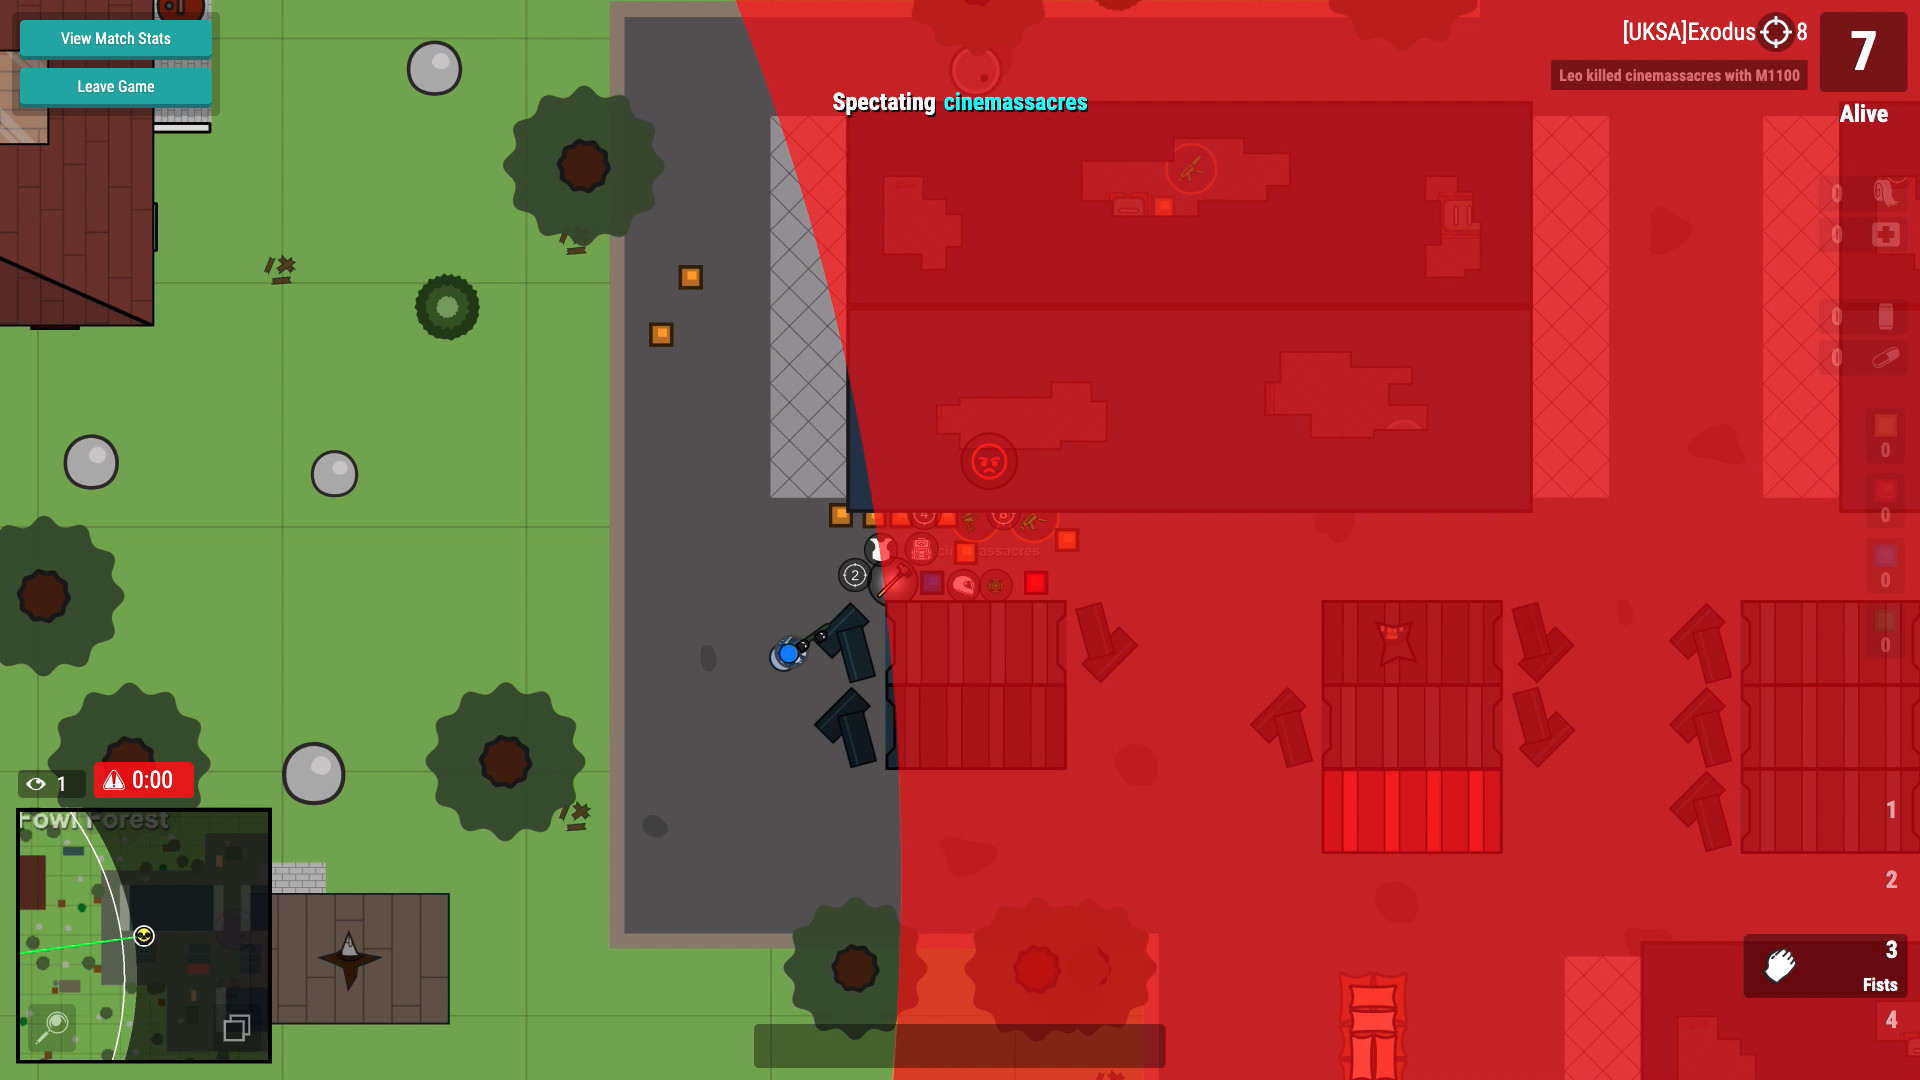 THELAST.IO: BATTLE ROYALE free online game on